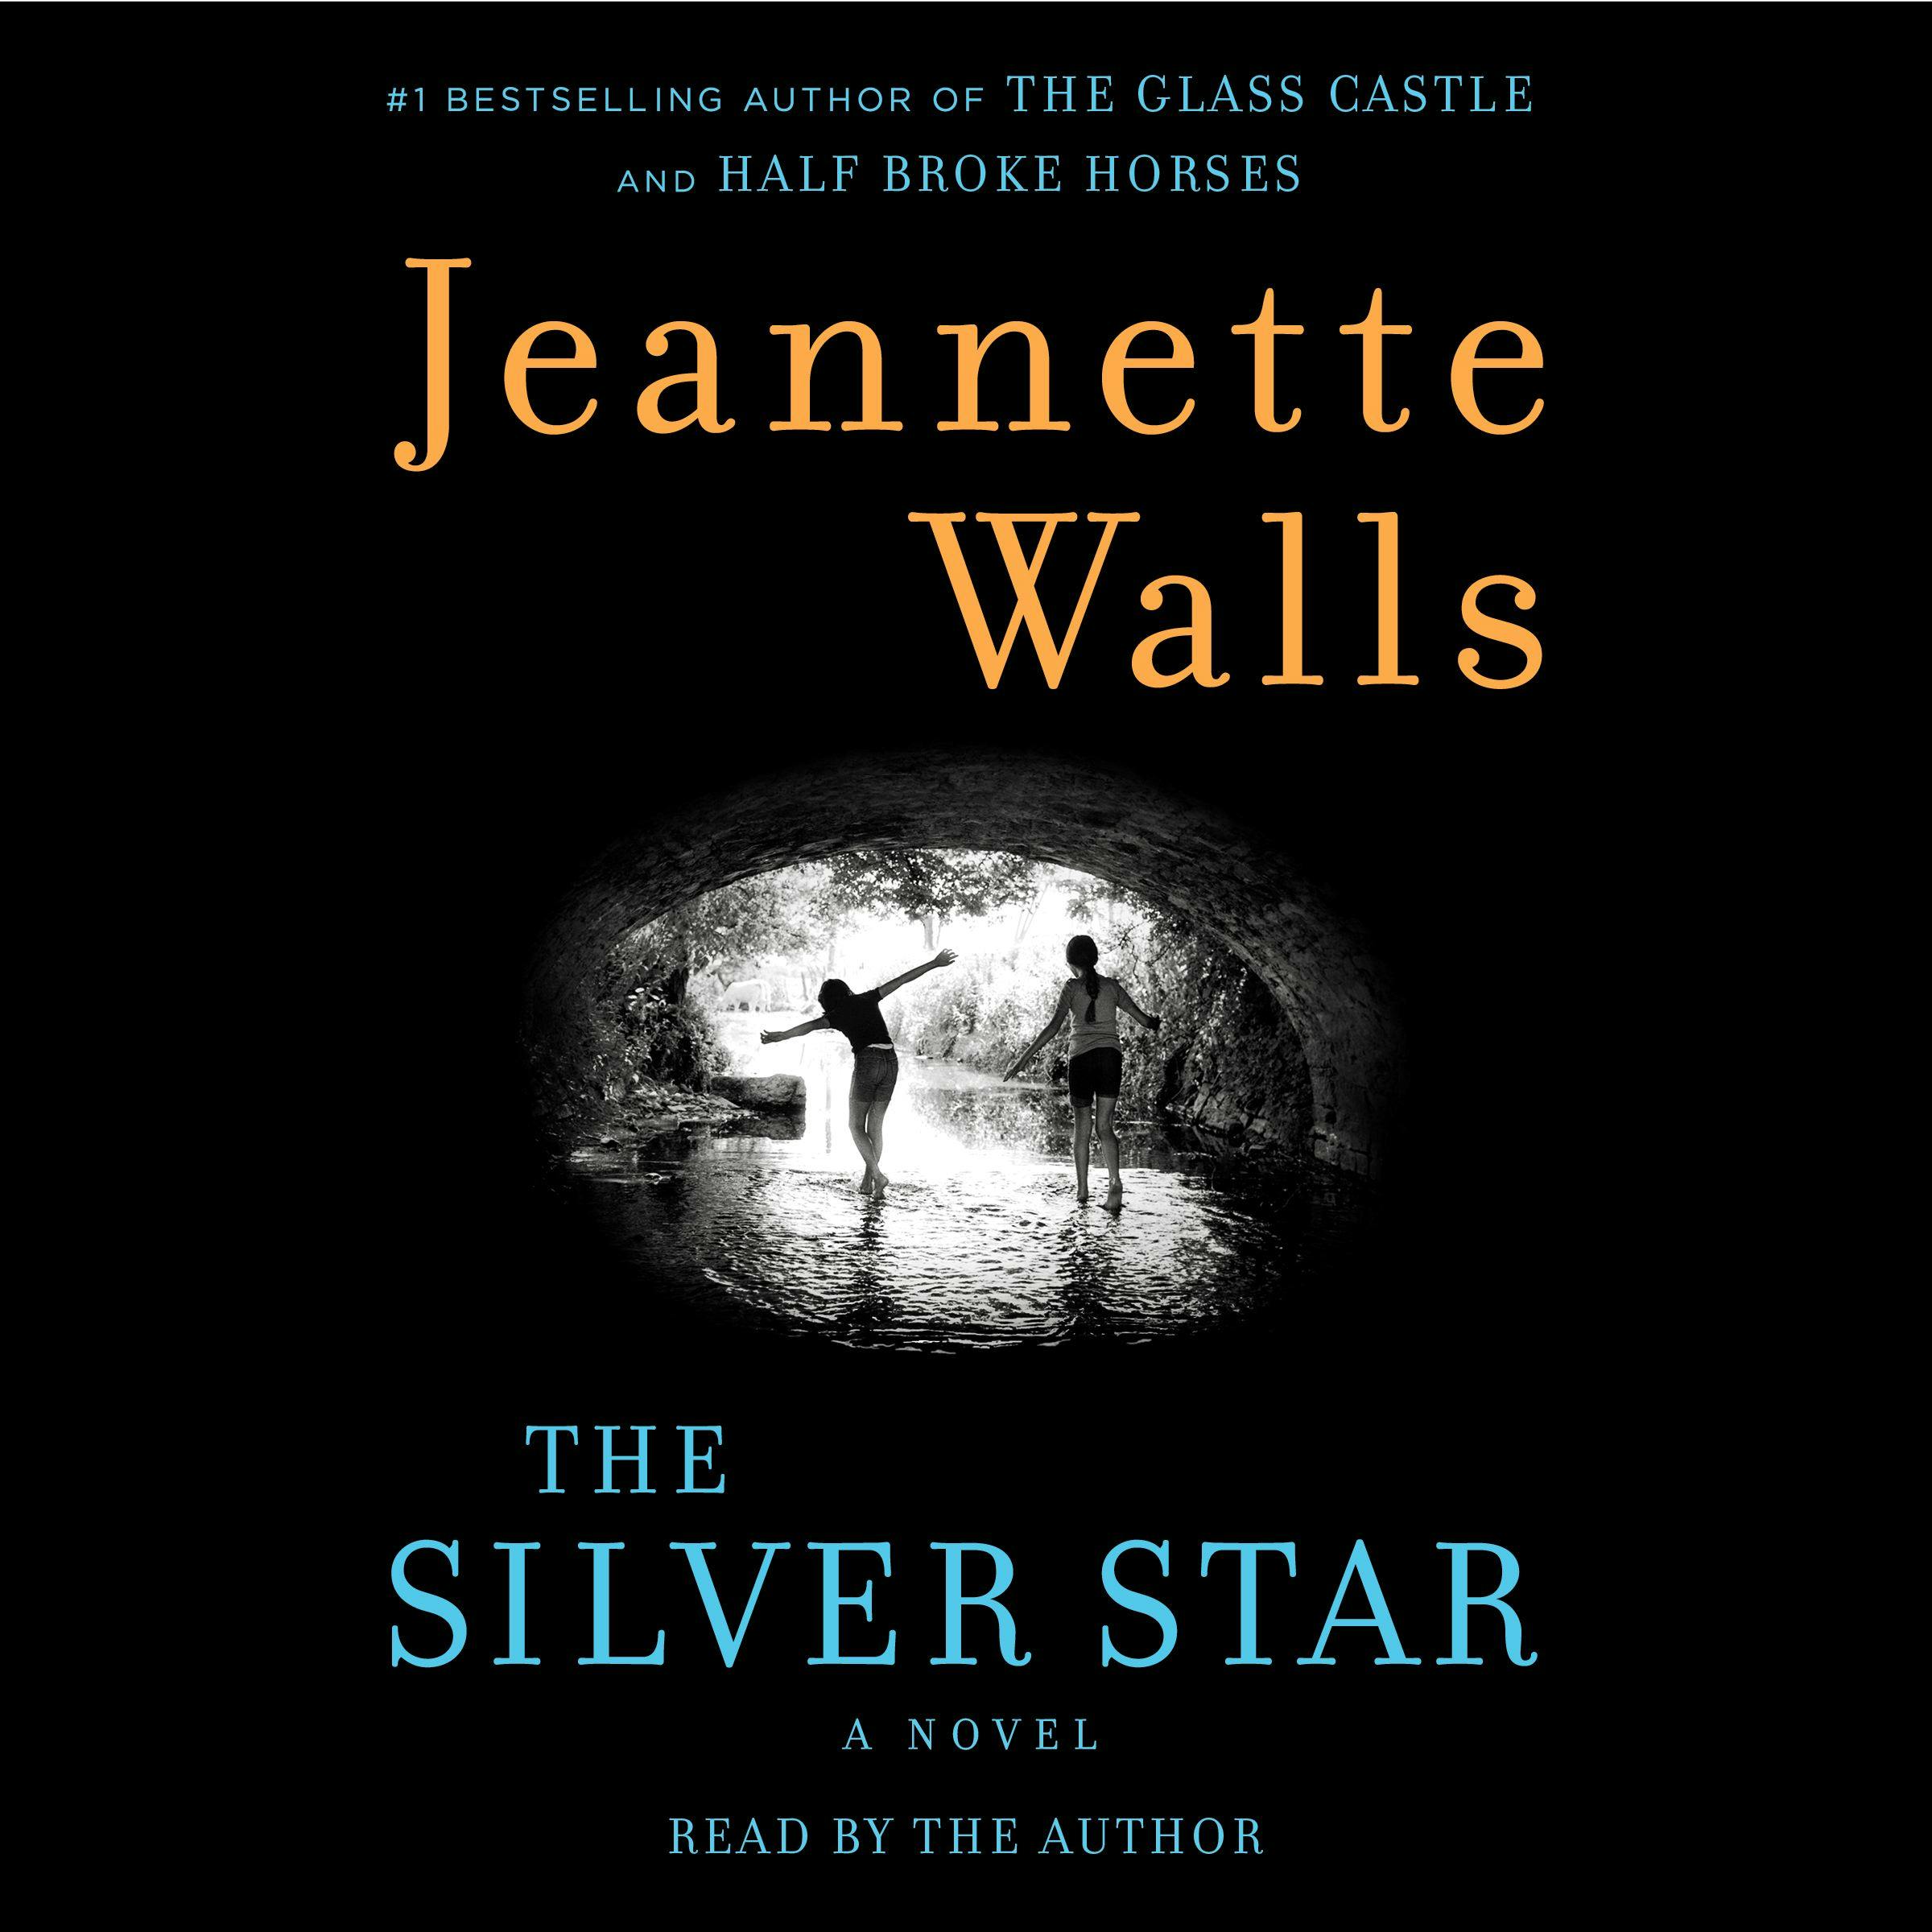 The Silver Star: A Novel - undefined